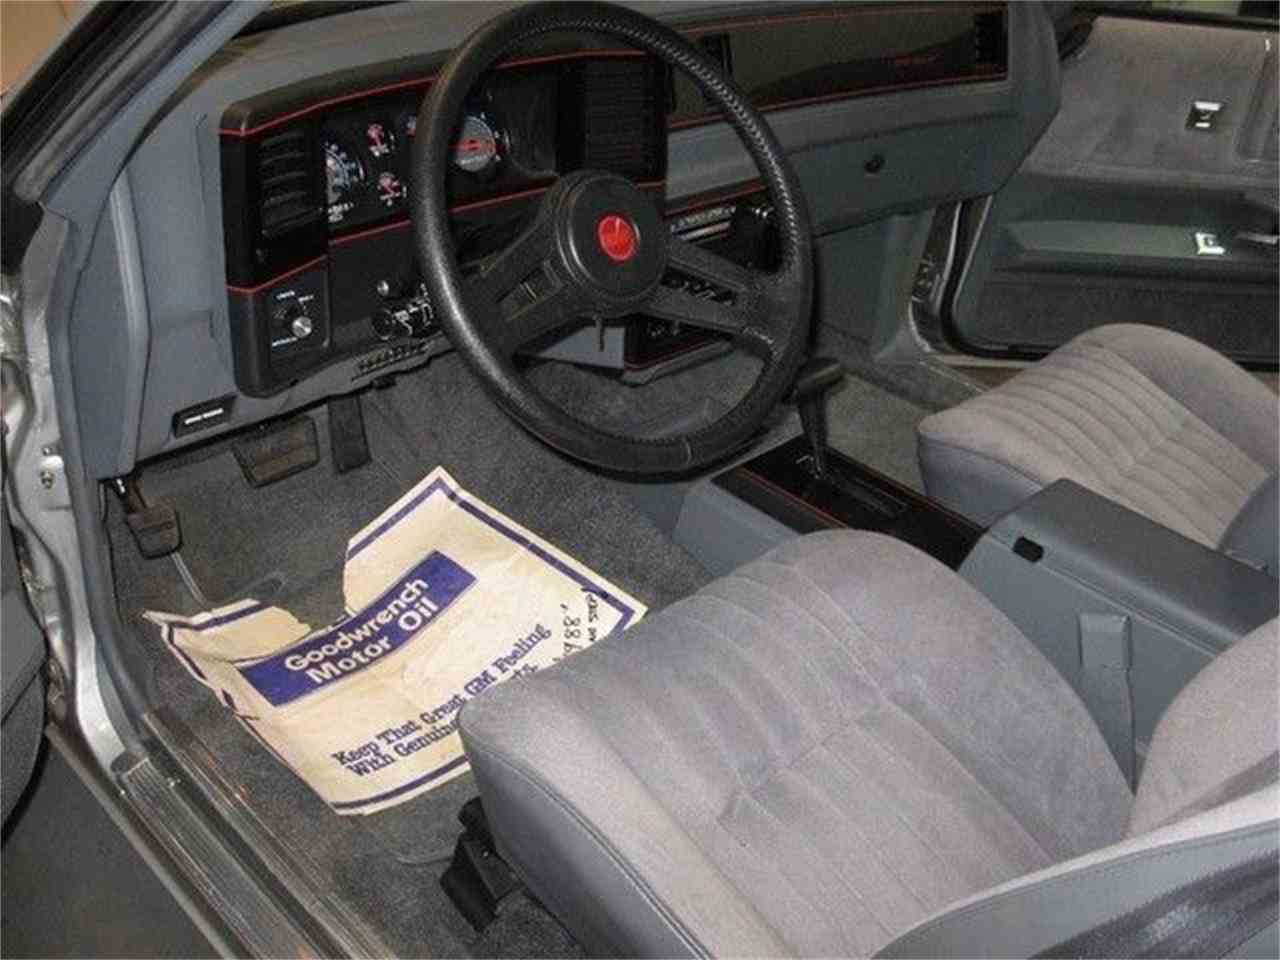 , 1988 Chevy Monte Carlo is an immaculate, low-mileage survivor, ClassicCars.com Journal